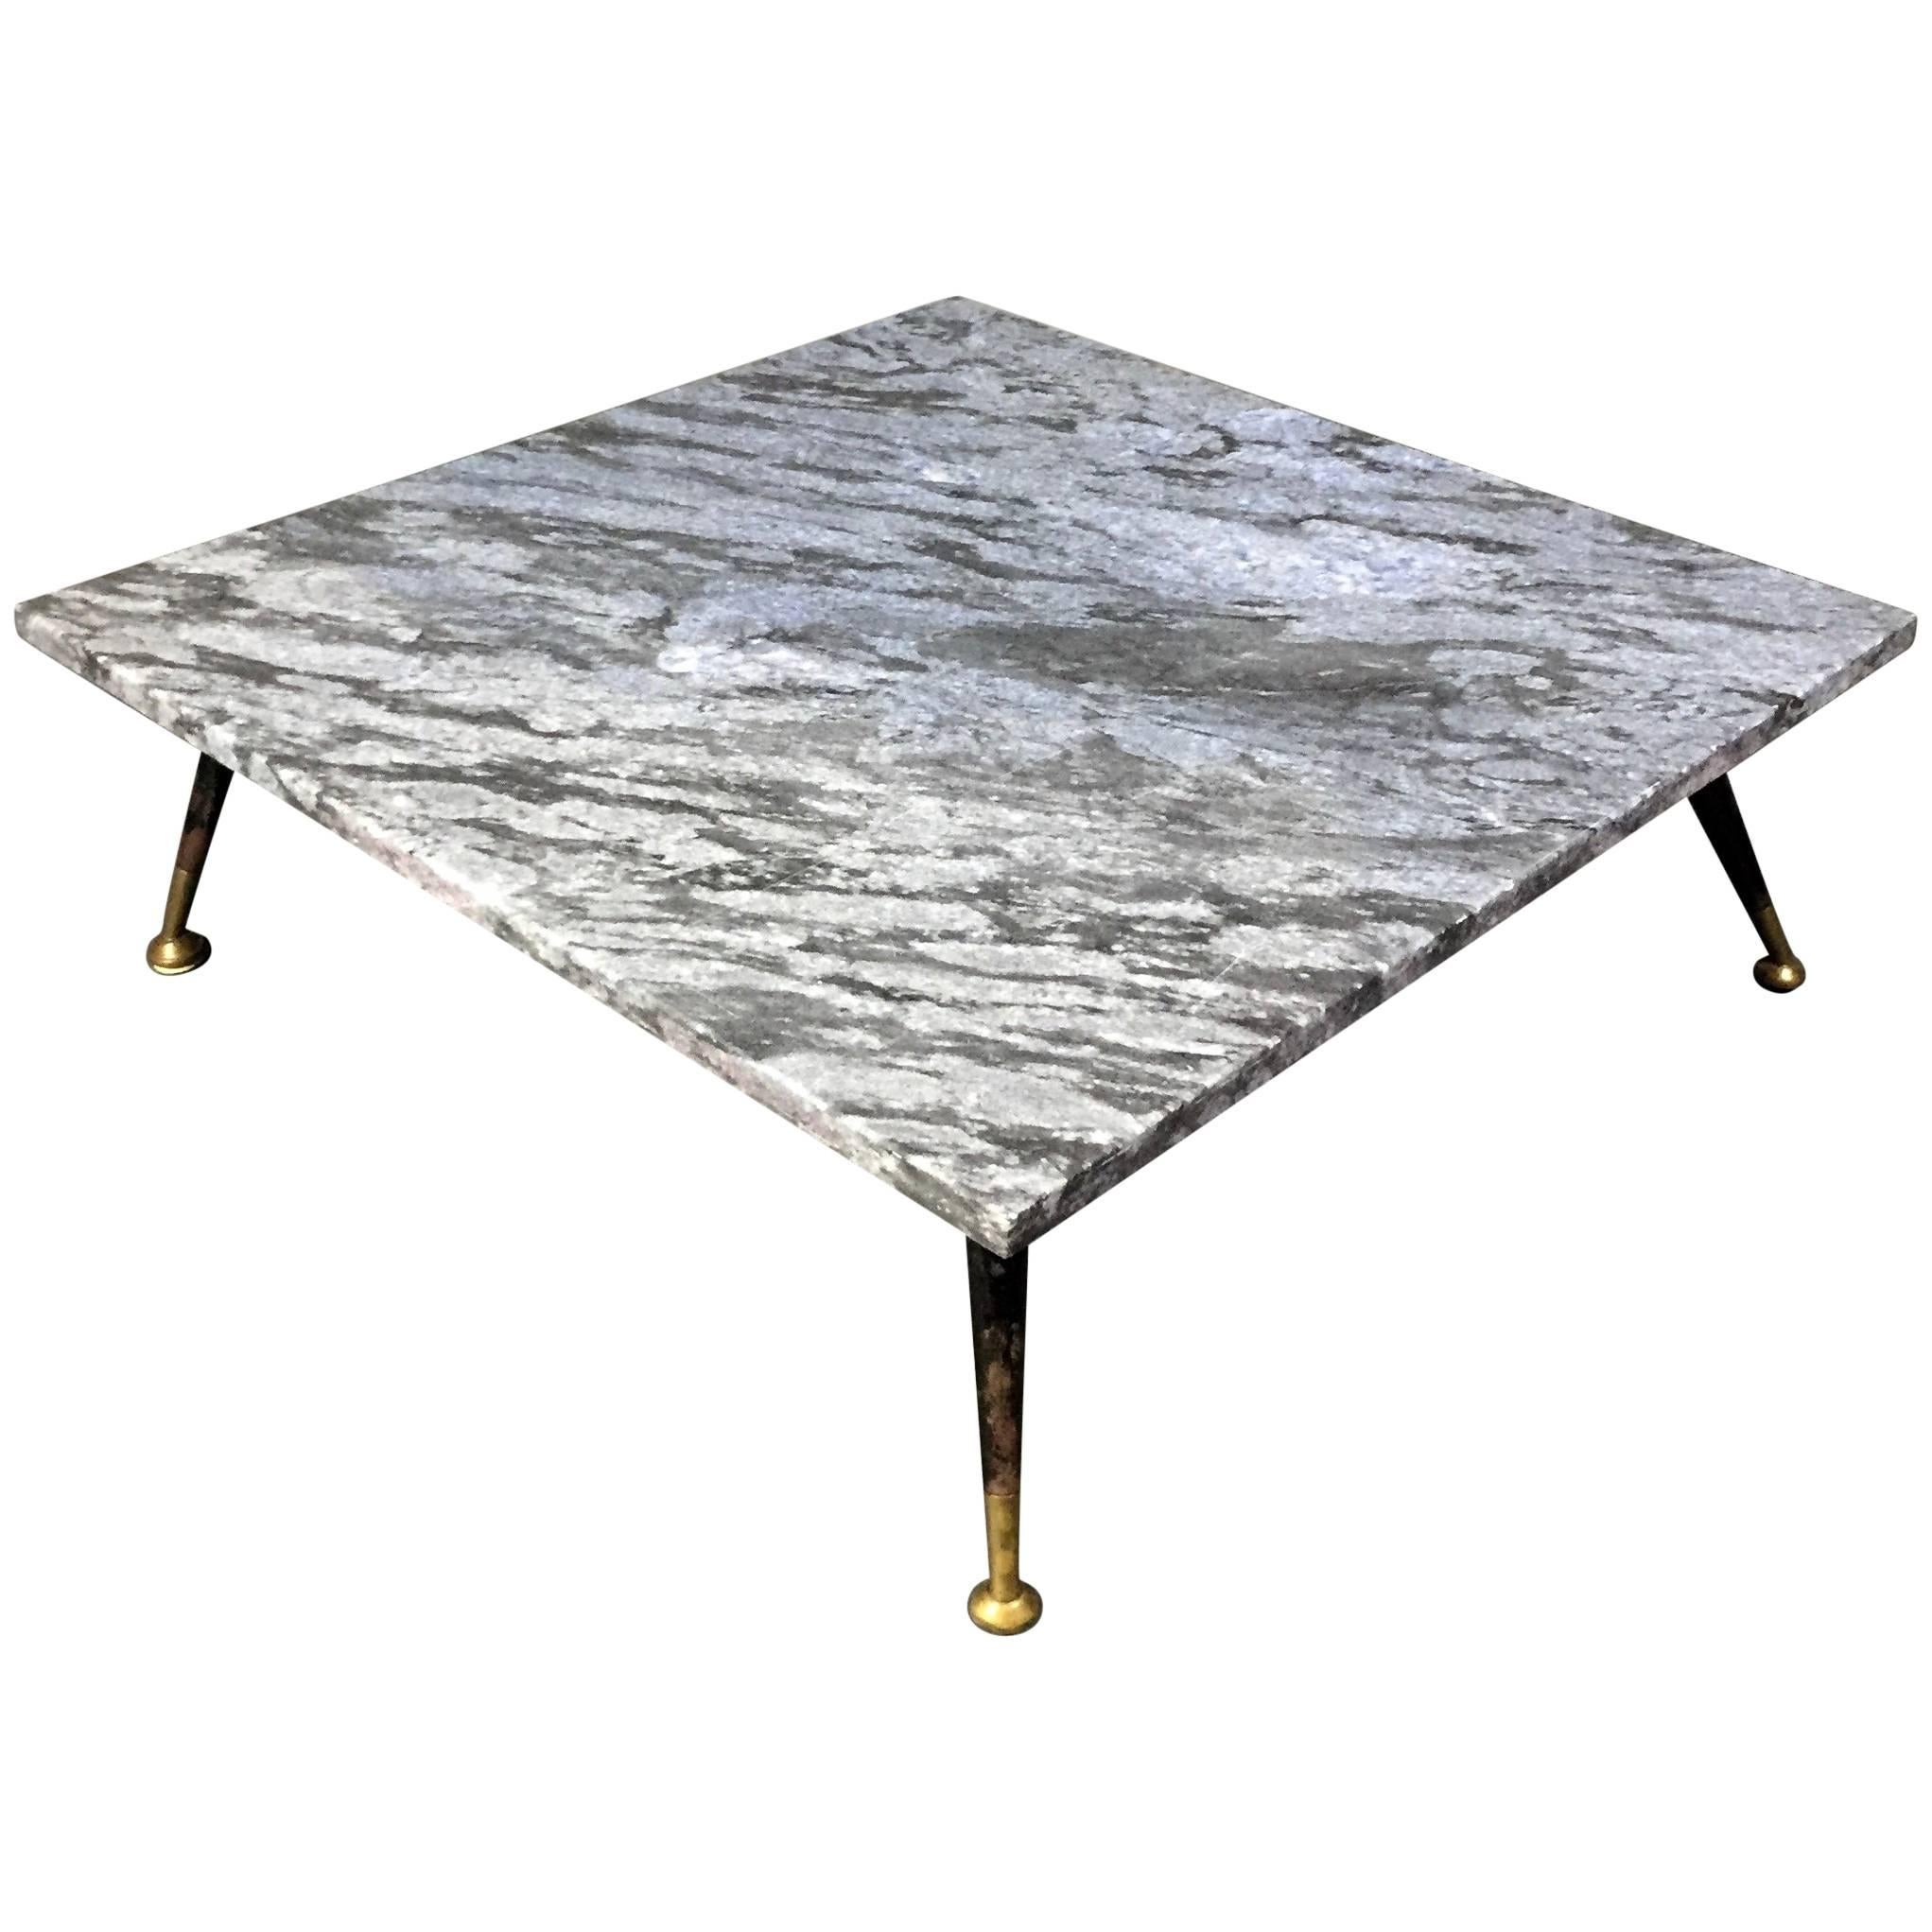 1950s Italian Low Marble Coffee Table, Metal and Brass Legs